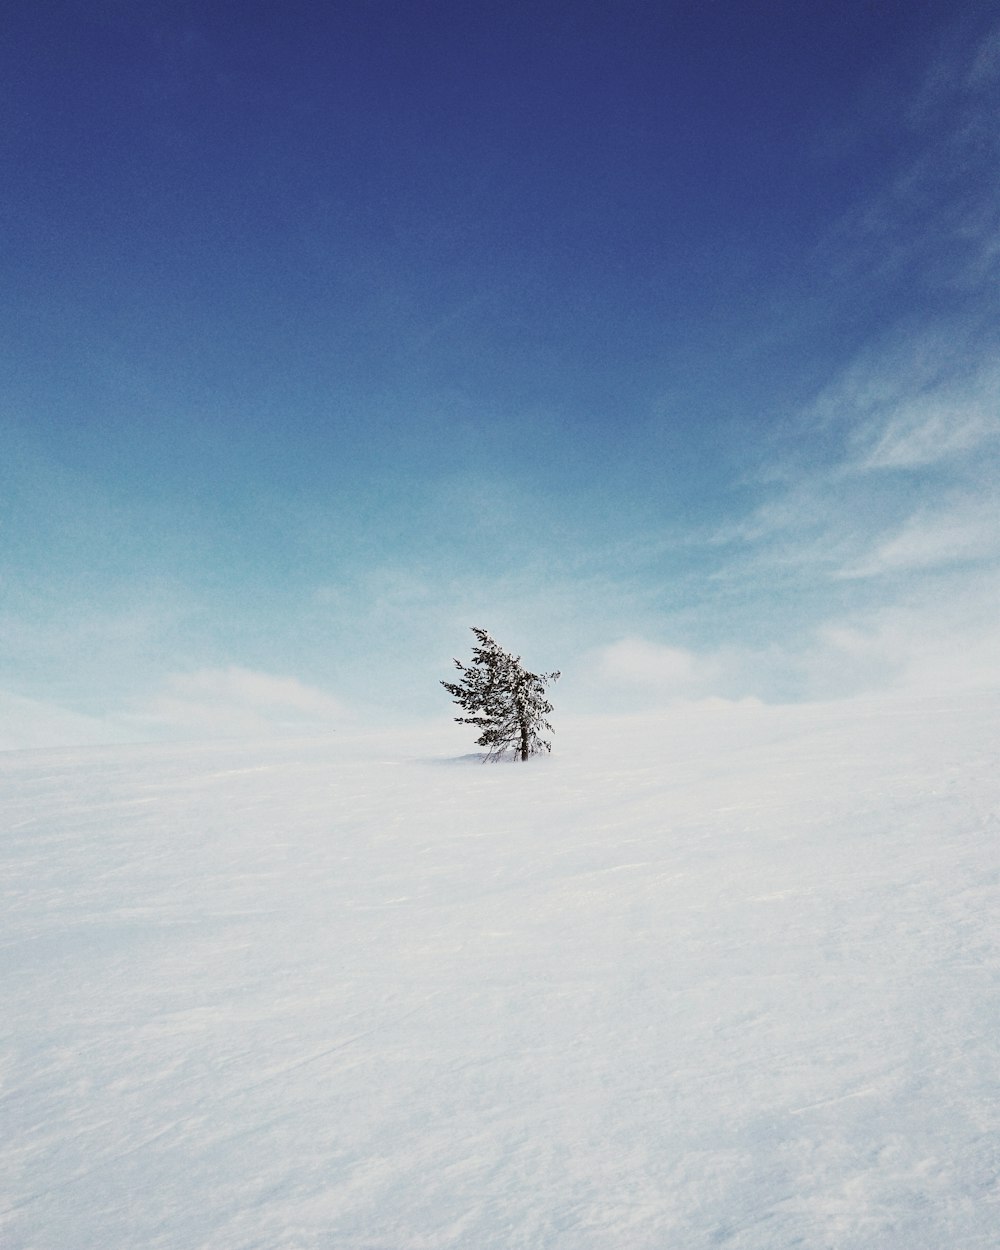 tree on snow field during daytime